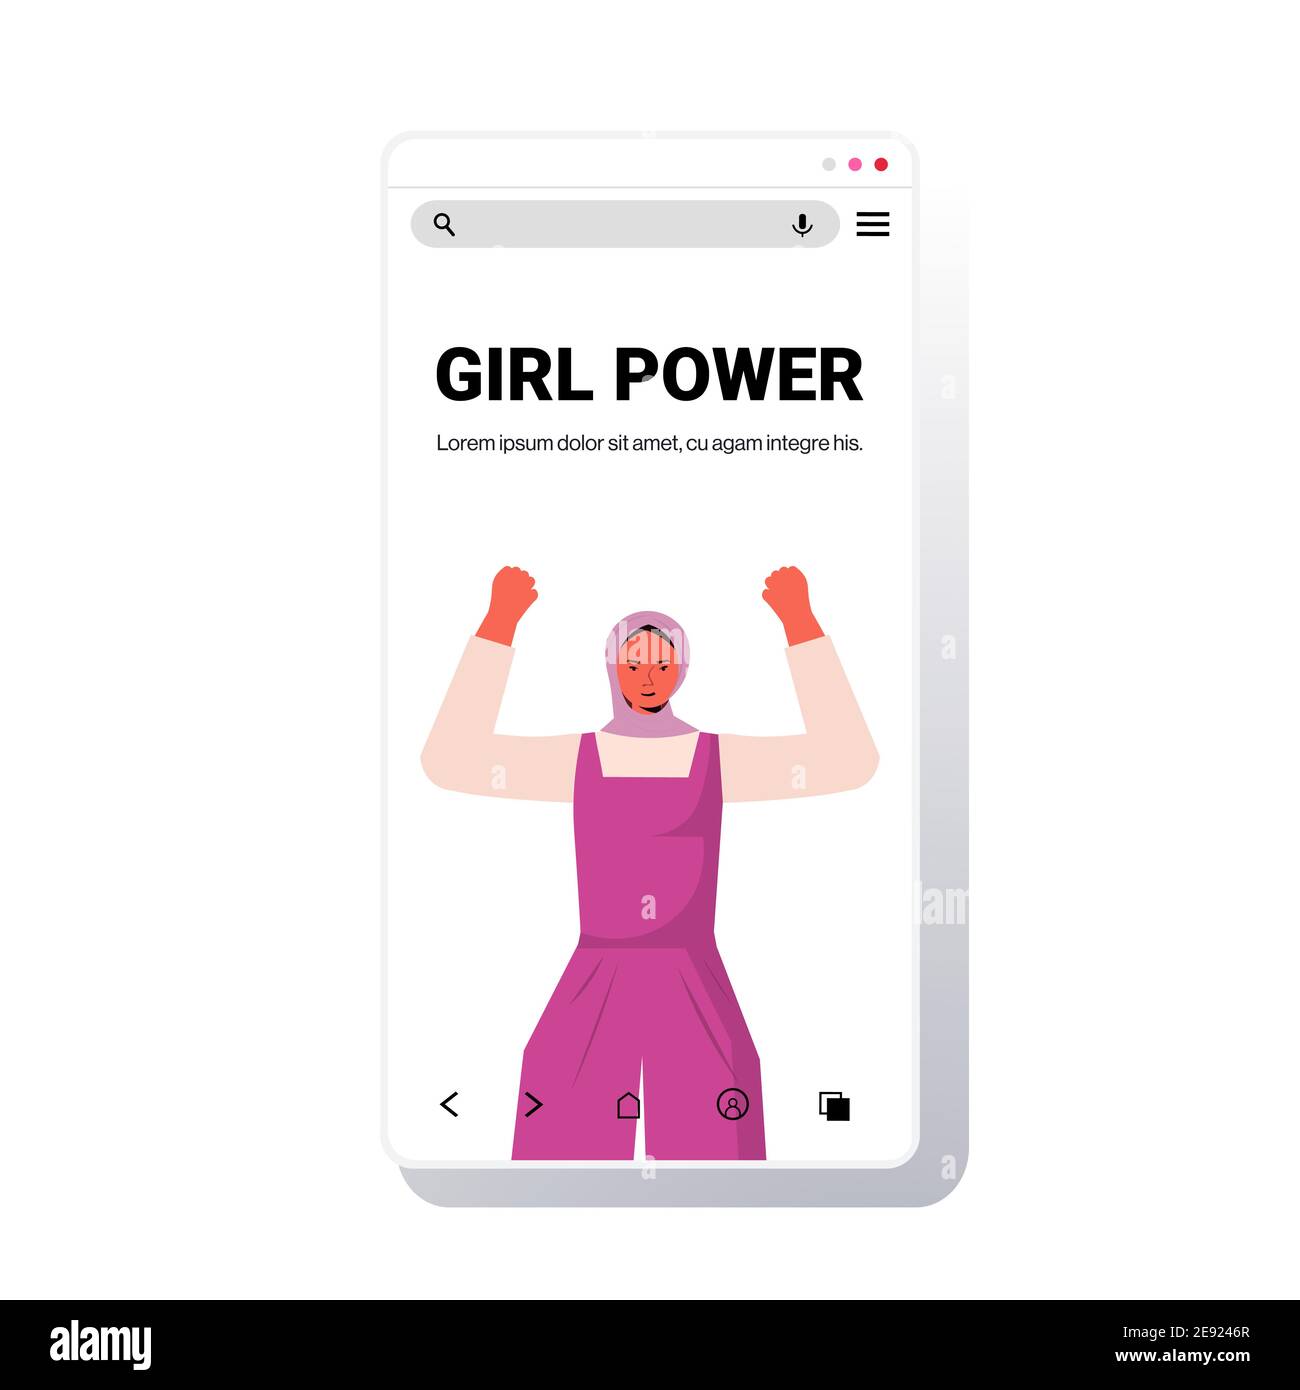 arab woman holding raised up hand female empowerment movement girl power union of feminists concept smartphone screen copy space portrait vector illustration Stock Vector